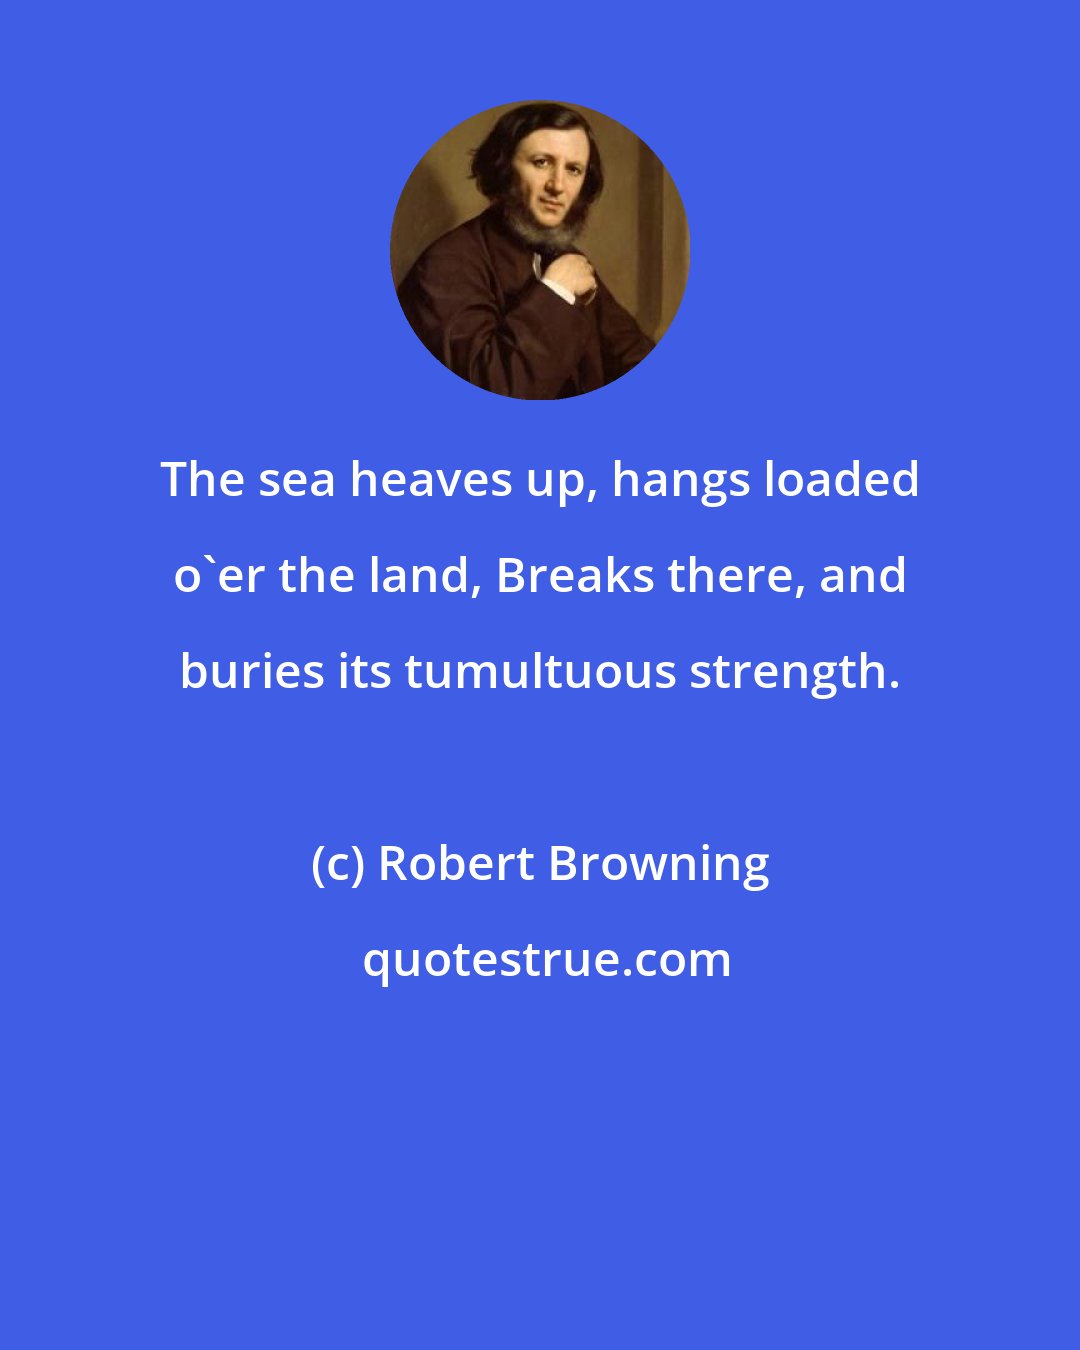 Robert Browning: The sea heaves up, hangs loaded o'er the land, Breaks there, and buries its tumultuous strength.